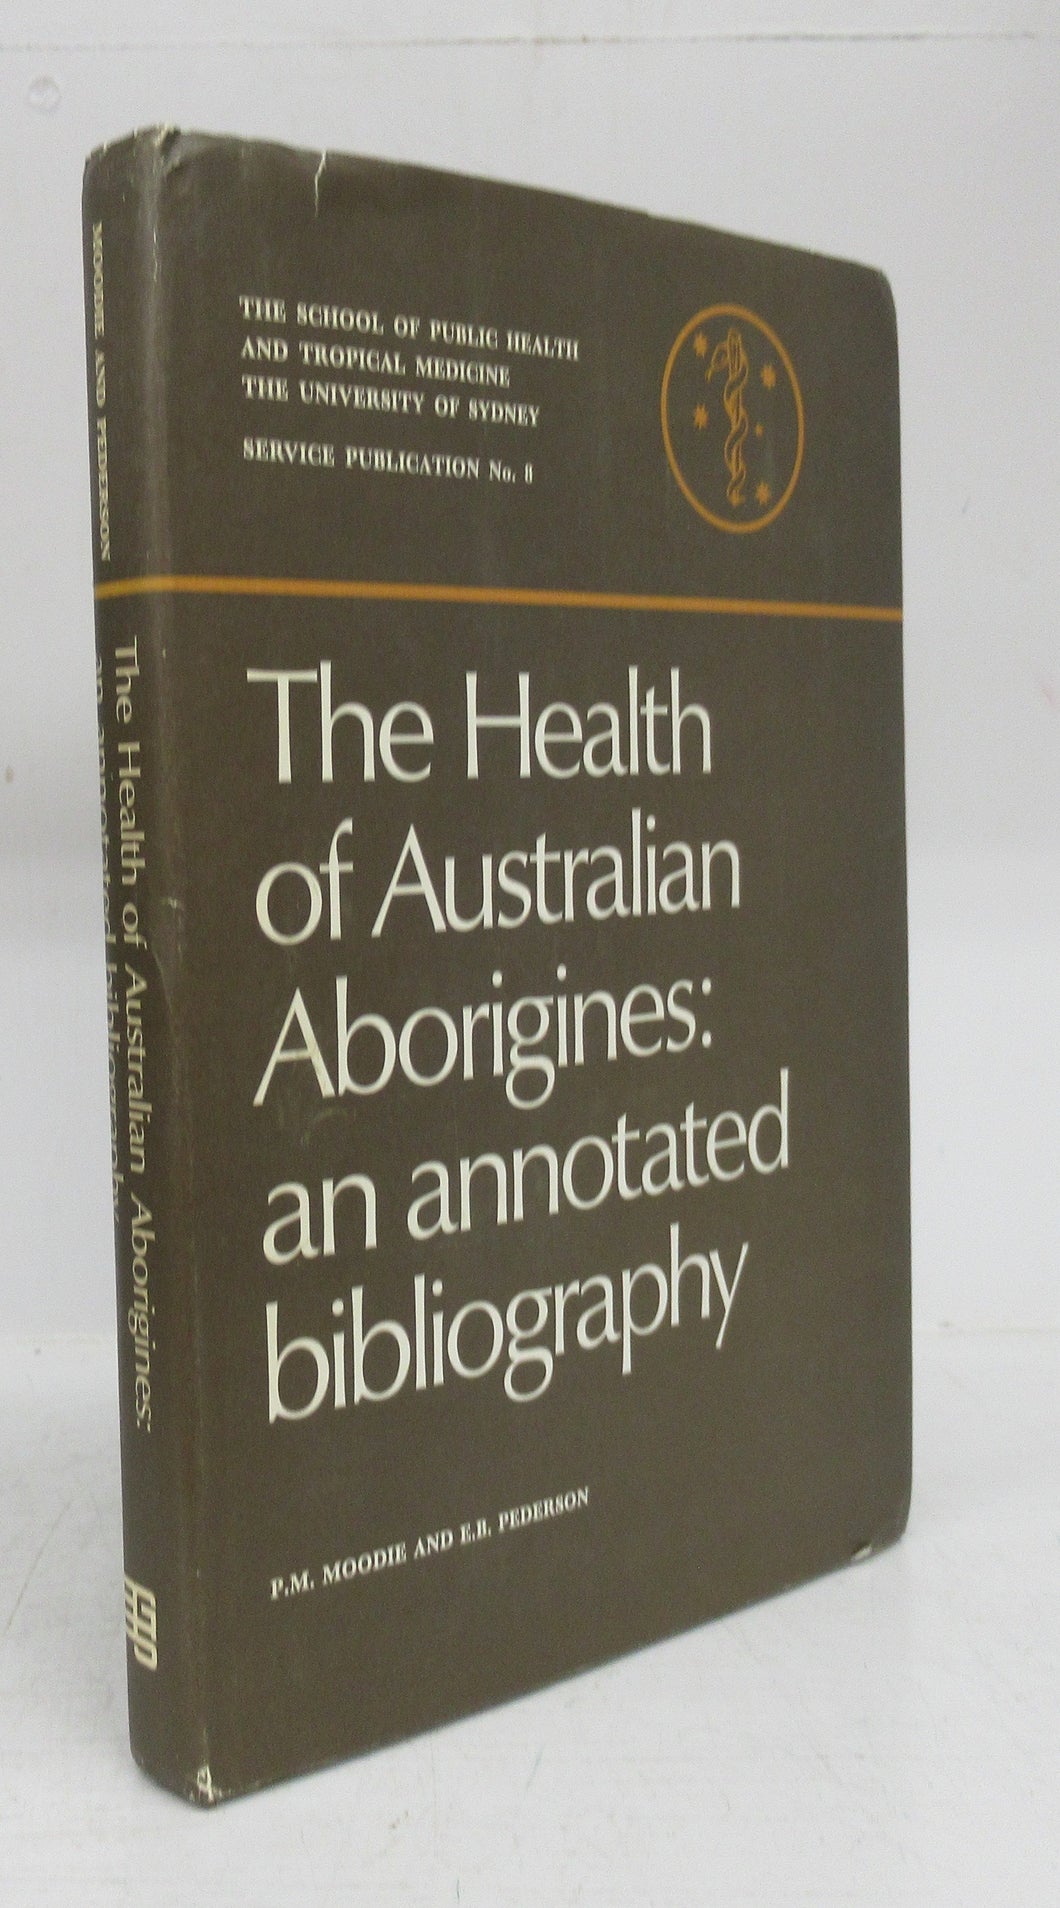 The Health of Australian Aborigines: an annotated bibliography